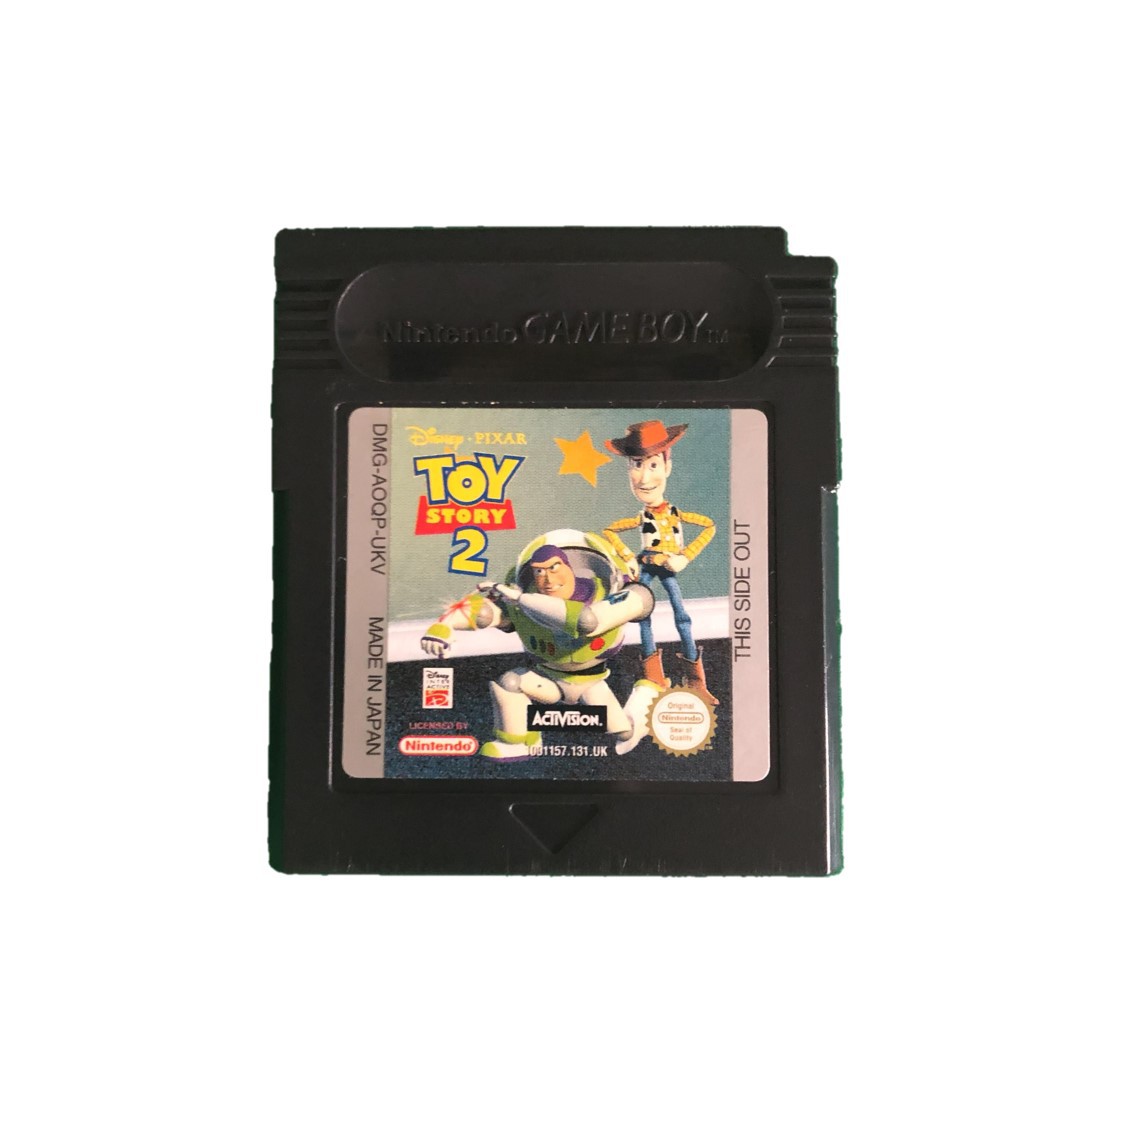 Toy Story 2 - Gameboy Color Games